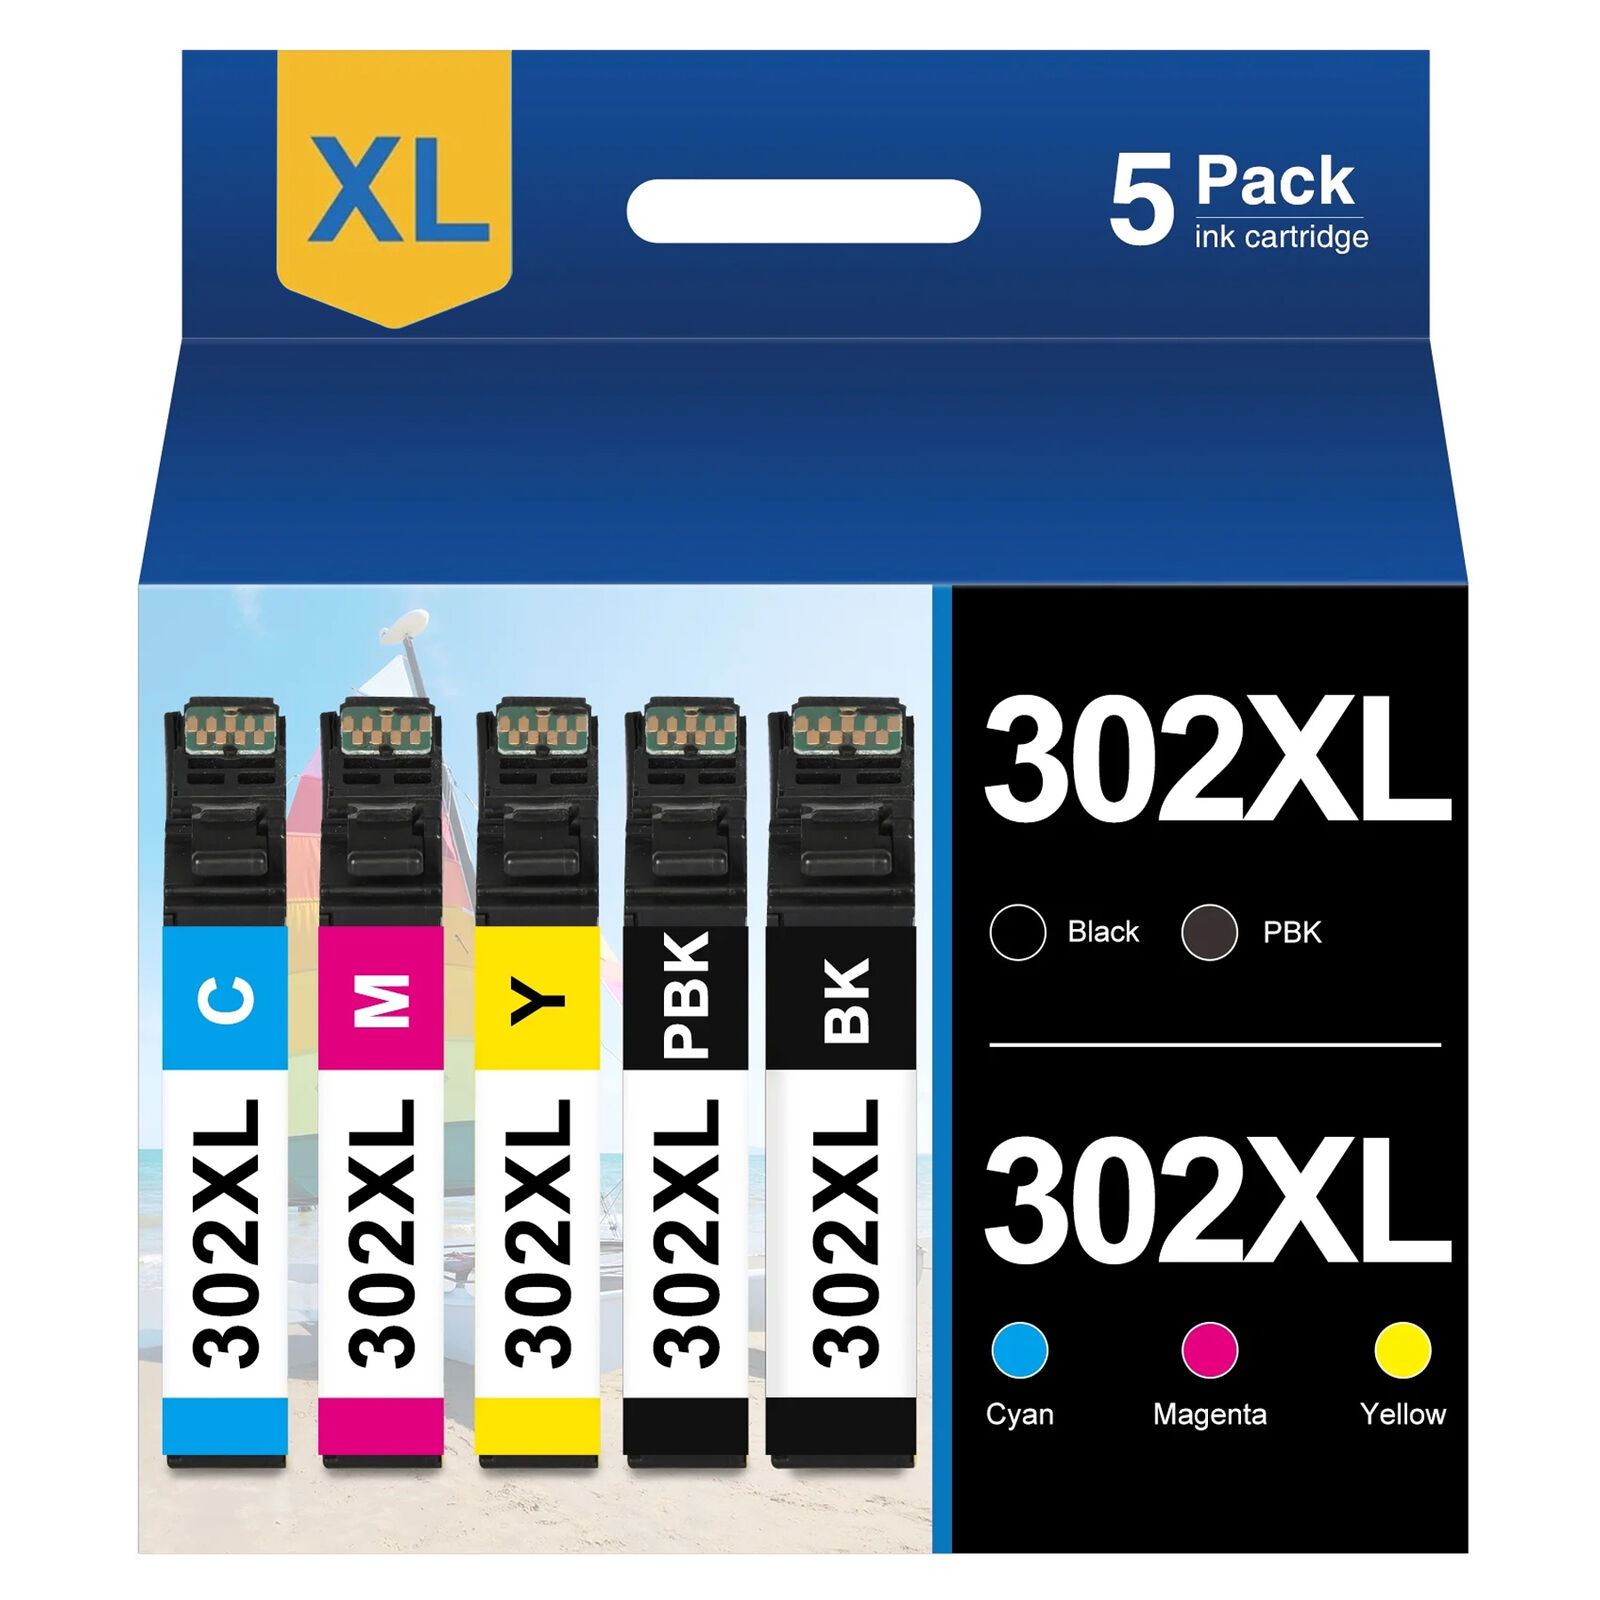 Replacement T302XL 302 XL Ink Cartridge for XP 6000 XP 6100 Printer - 5 Pack